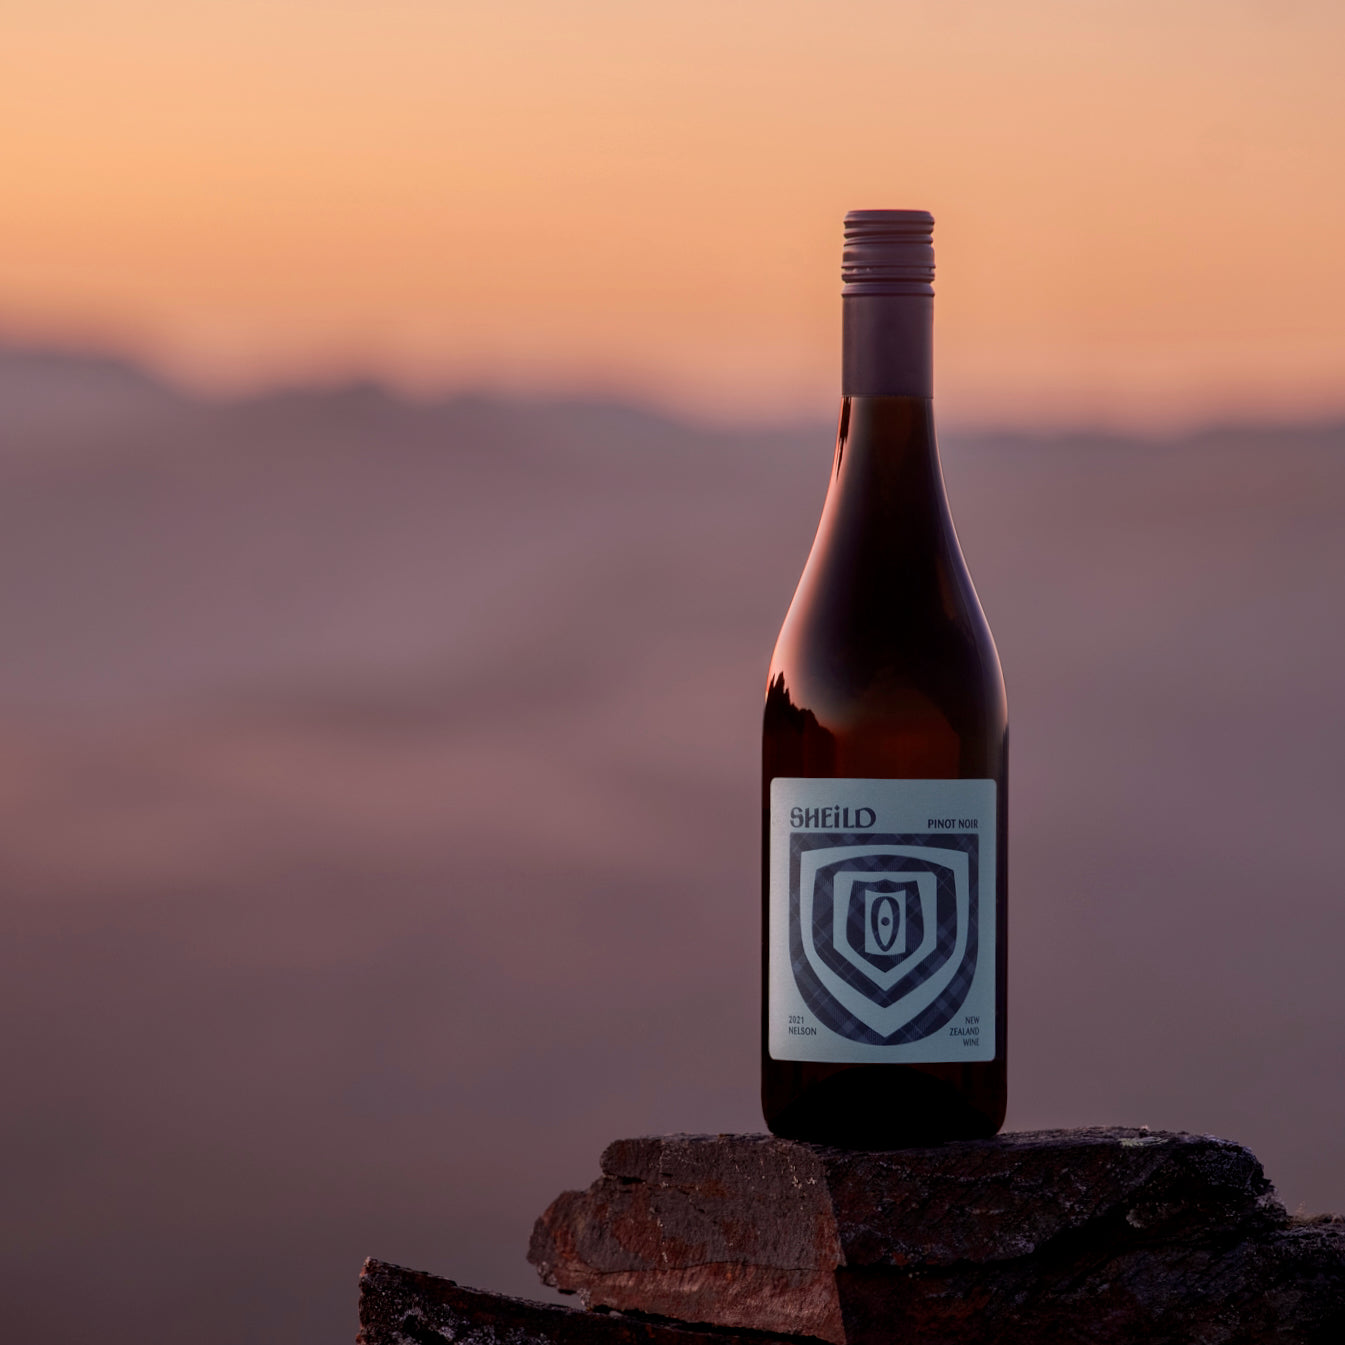 SHEiLD's Pinot Noir wine placed on a rock at the top of a mountain at sunset.